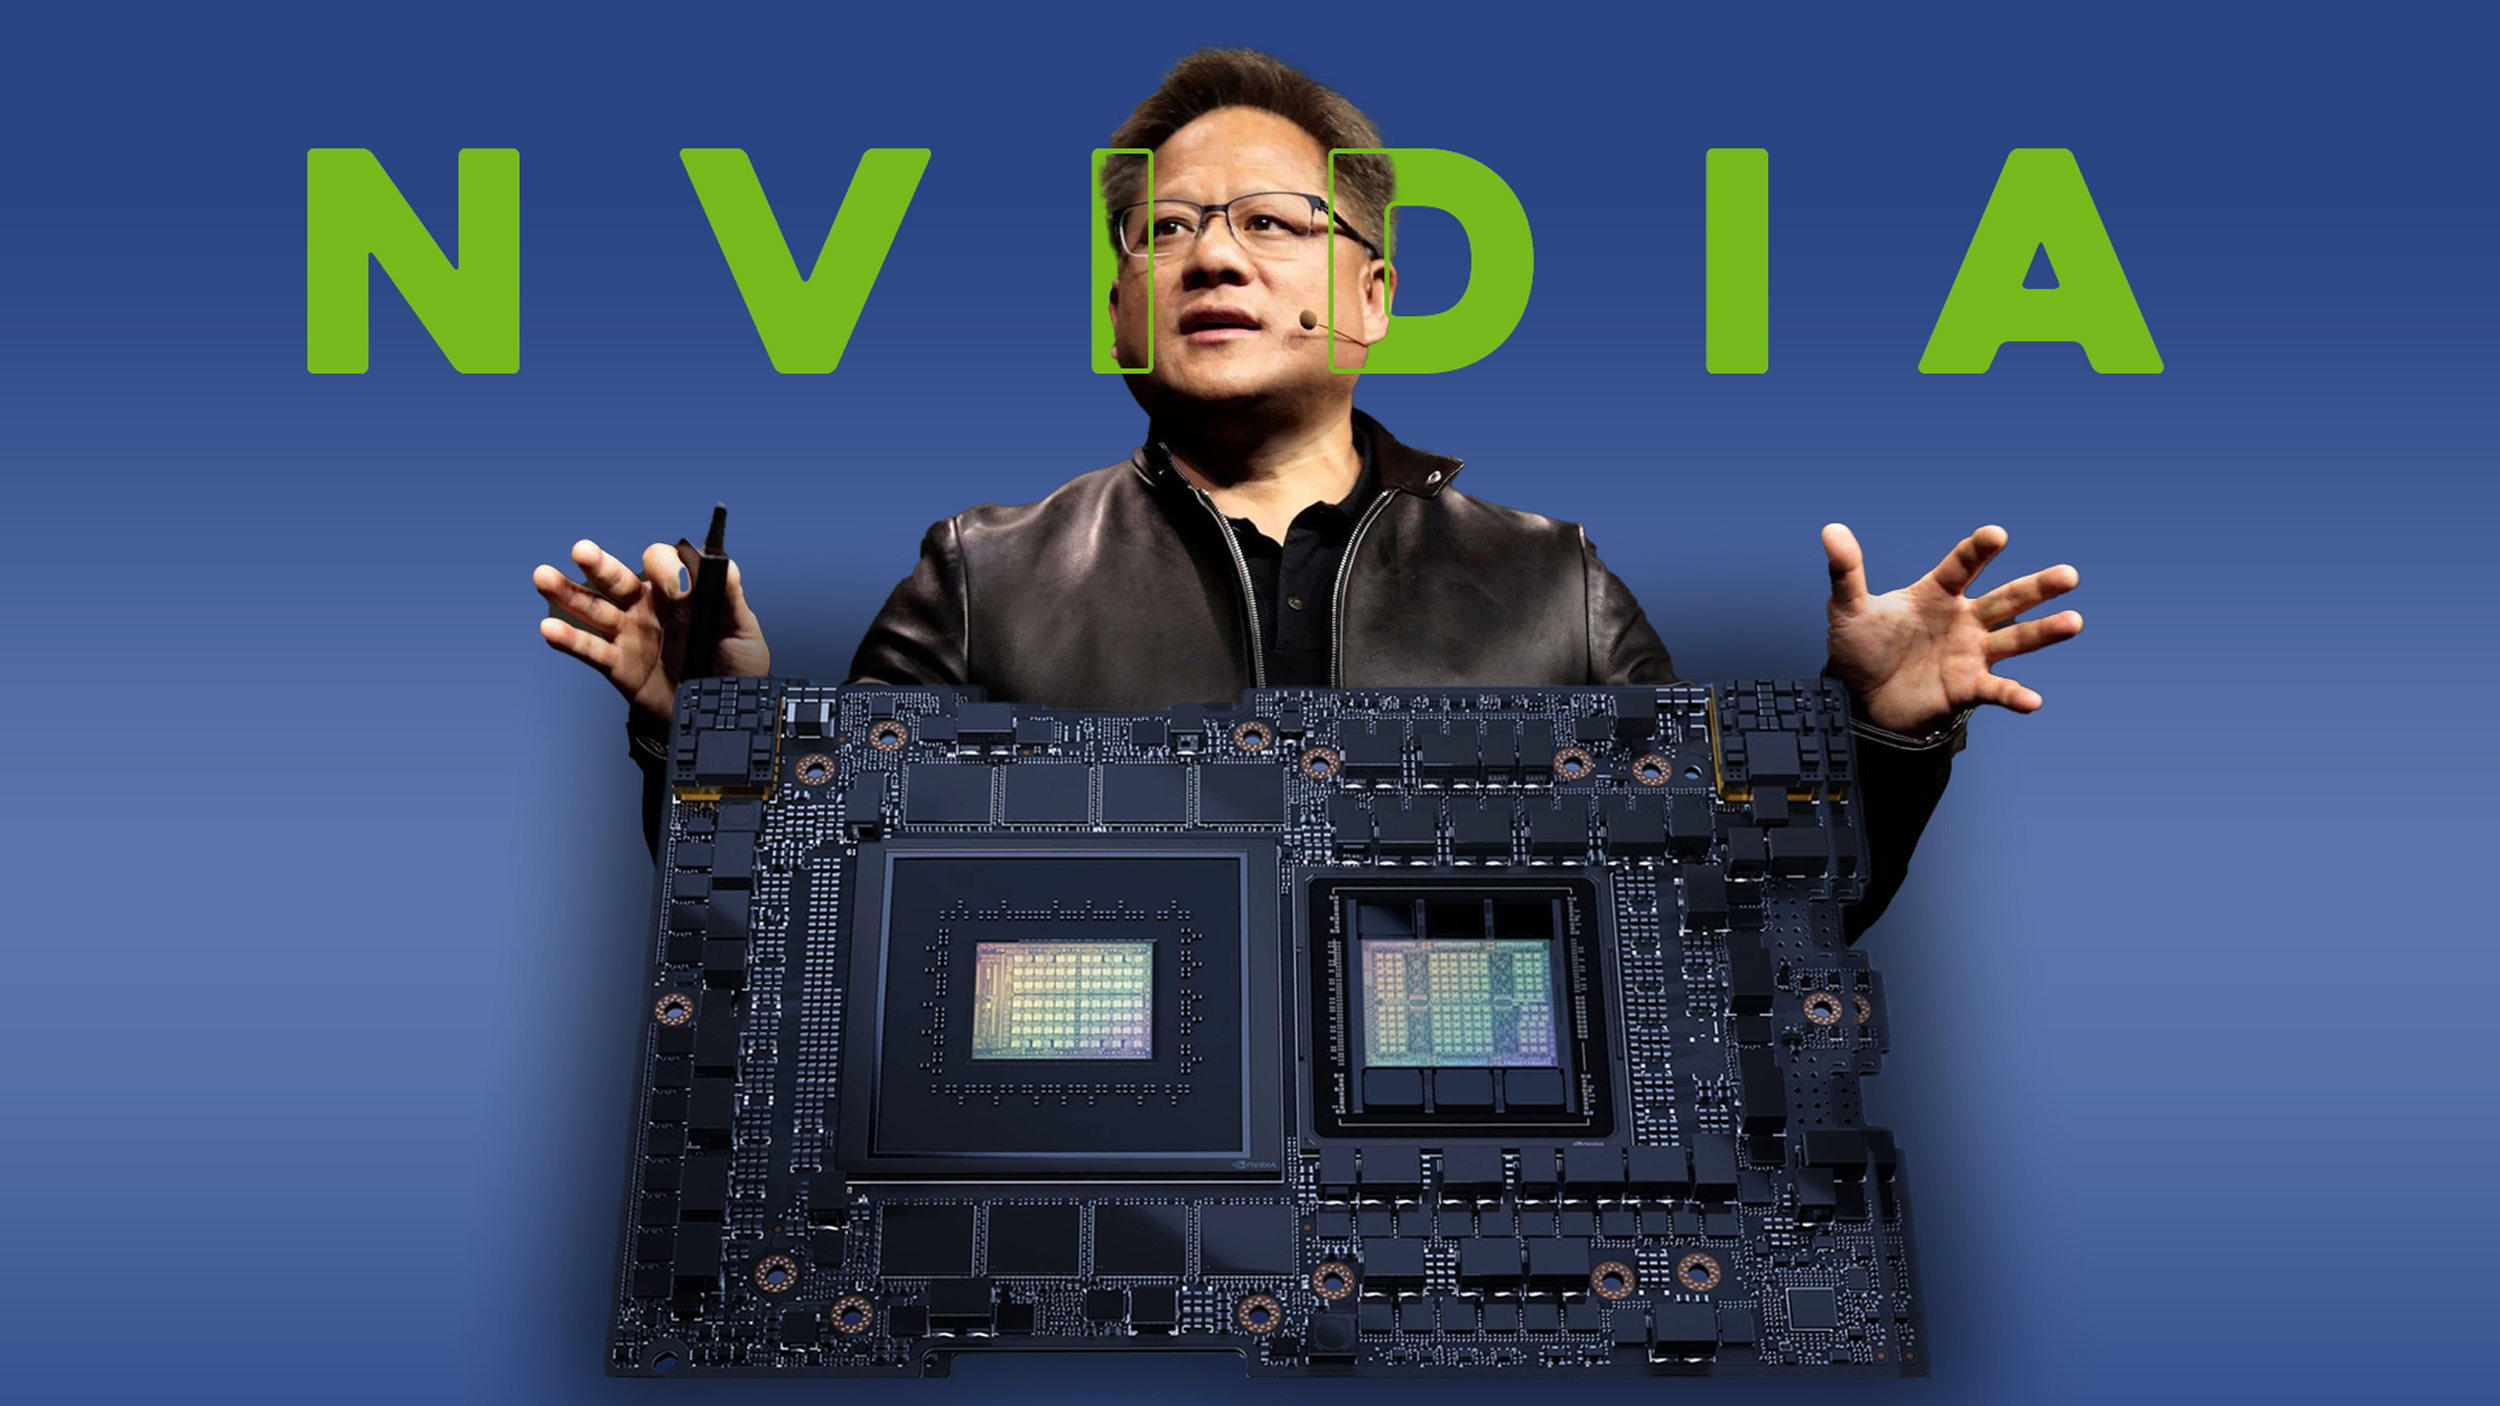 CEO Jensen Huang with New Nvidia Grace Hopper chip